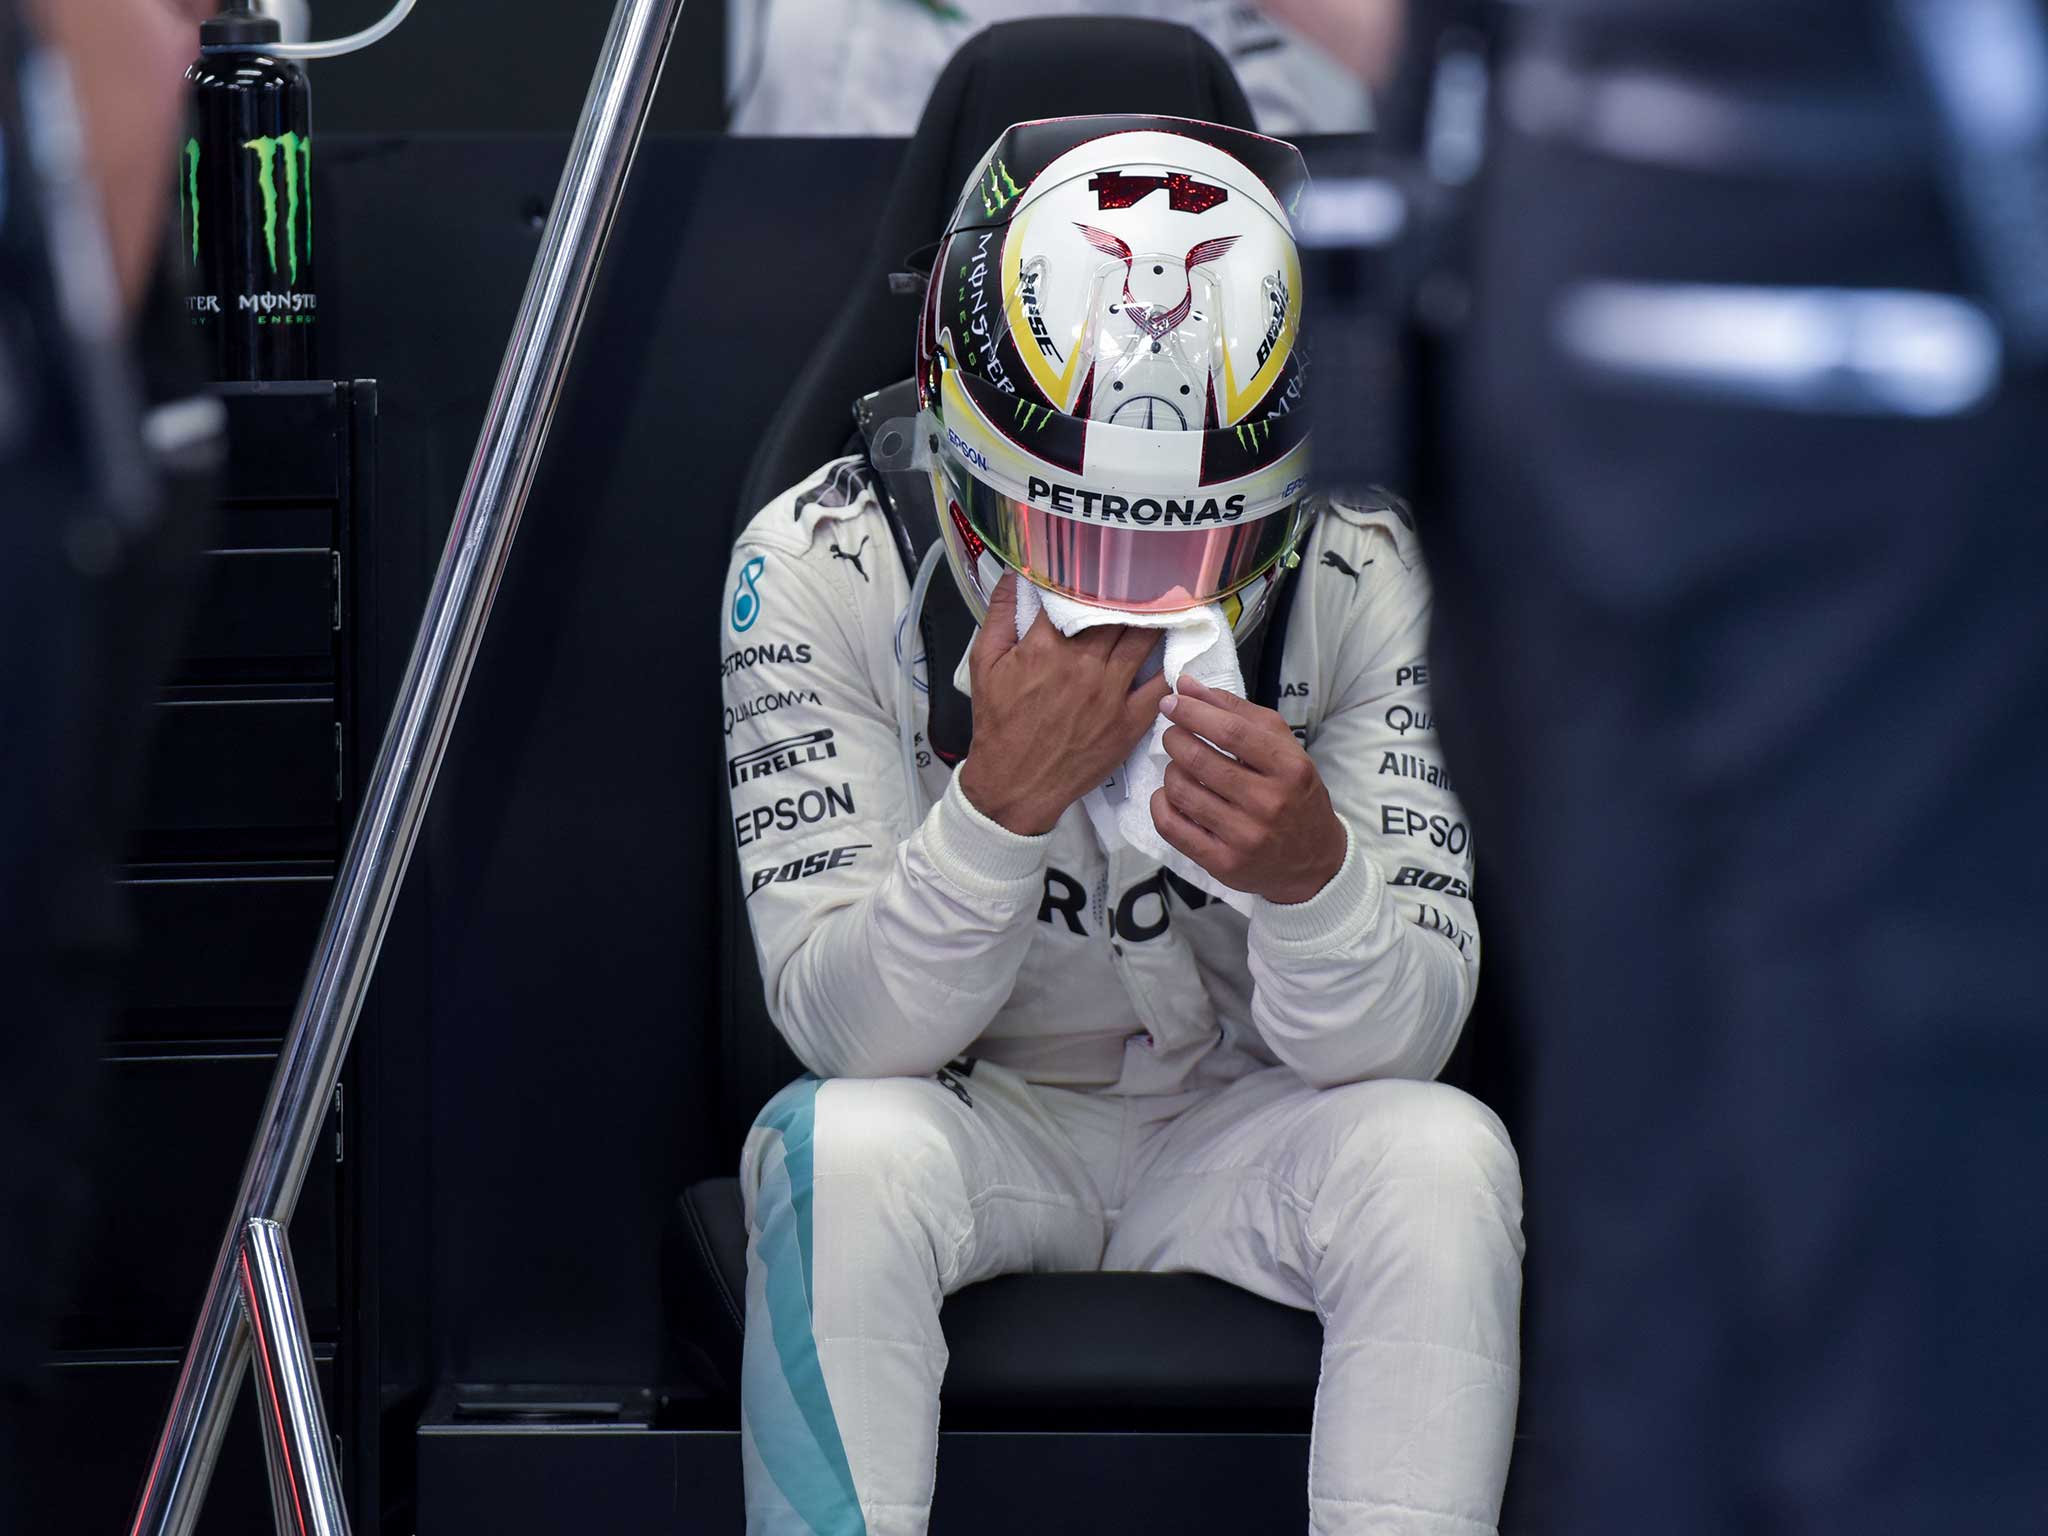 Lewis Hamilton takes a moment to himself after a disappointing day